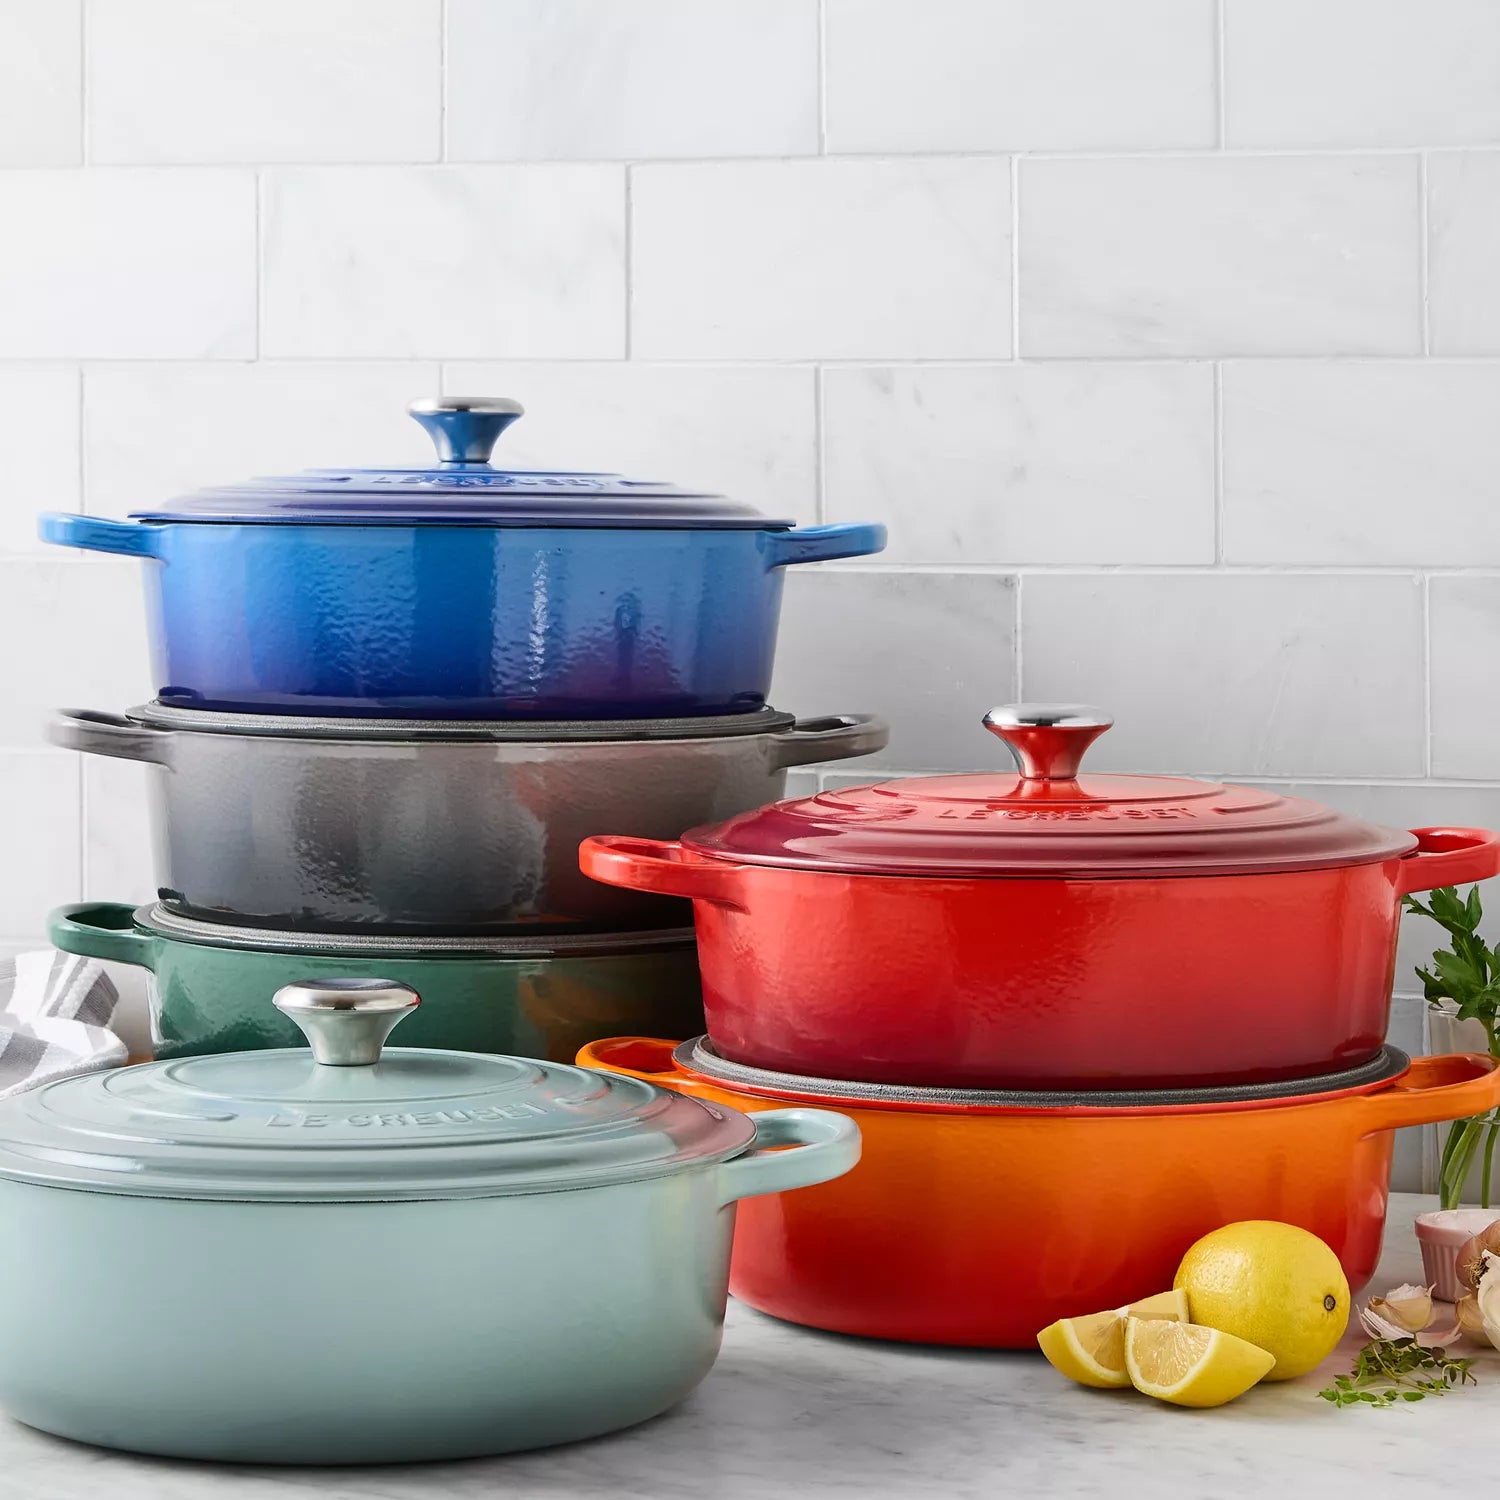 Le Creuset Wide Round Oven – SPECIAL – Flame